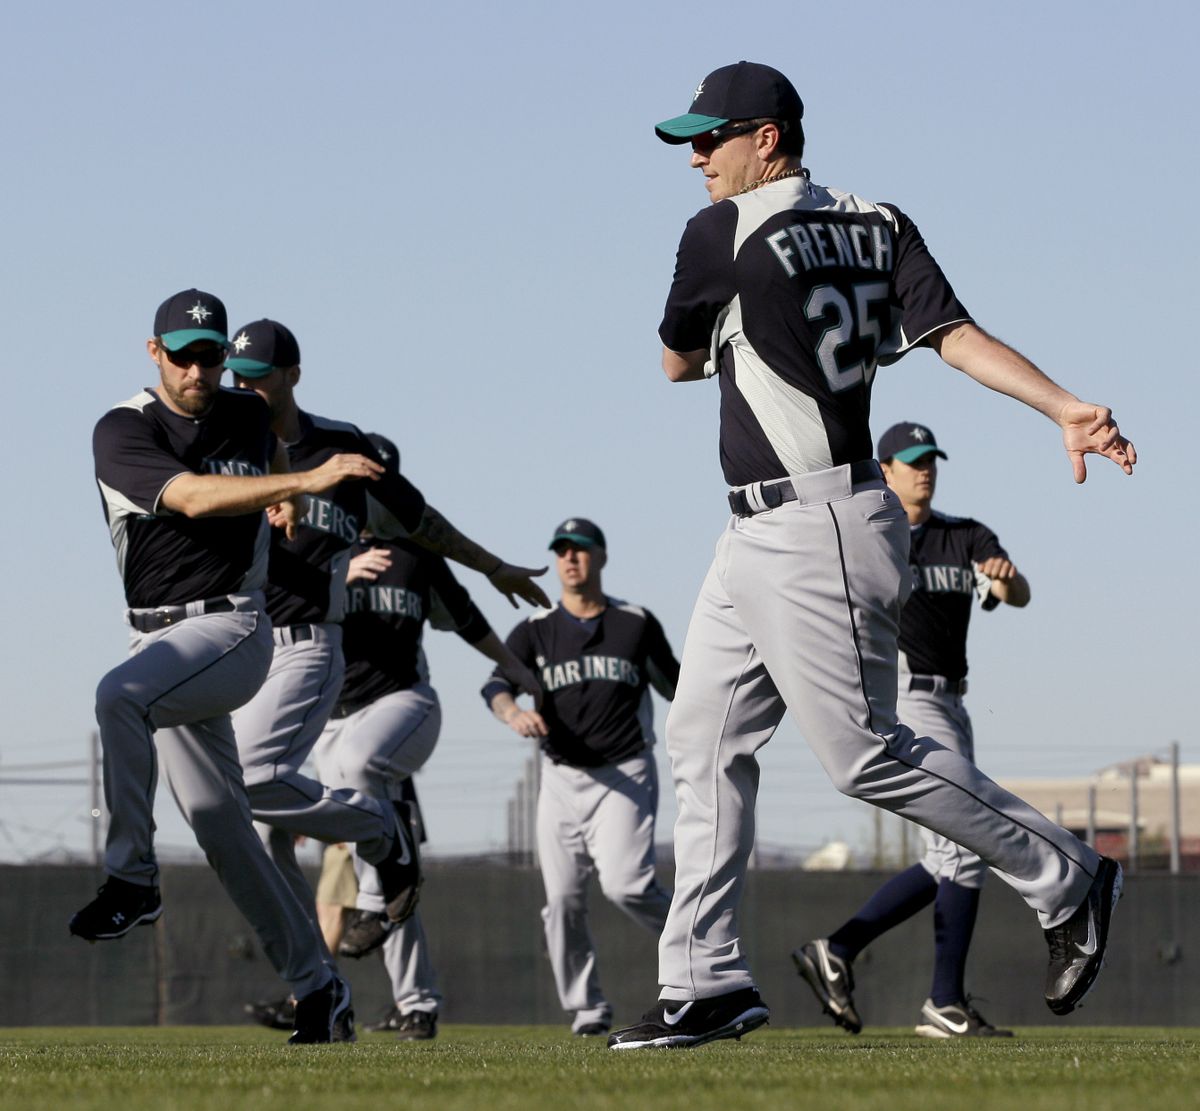 Seattle Mariners pitcher Luke French (25) and other players participate in a drill during baseball spring training Monday, Feb. 14, 2011, in Peoria, Ariz. (Charlie Riedel / Associated Press)